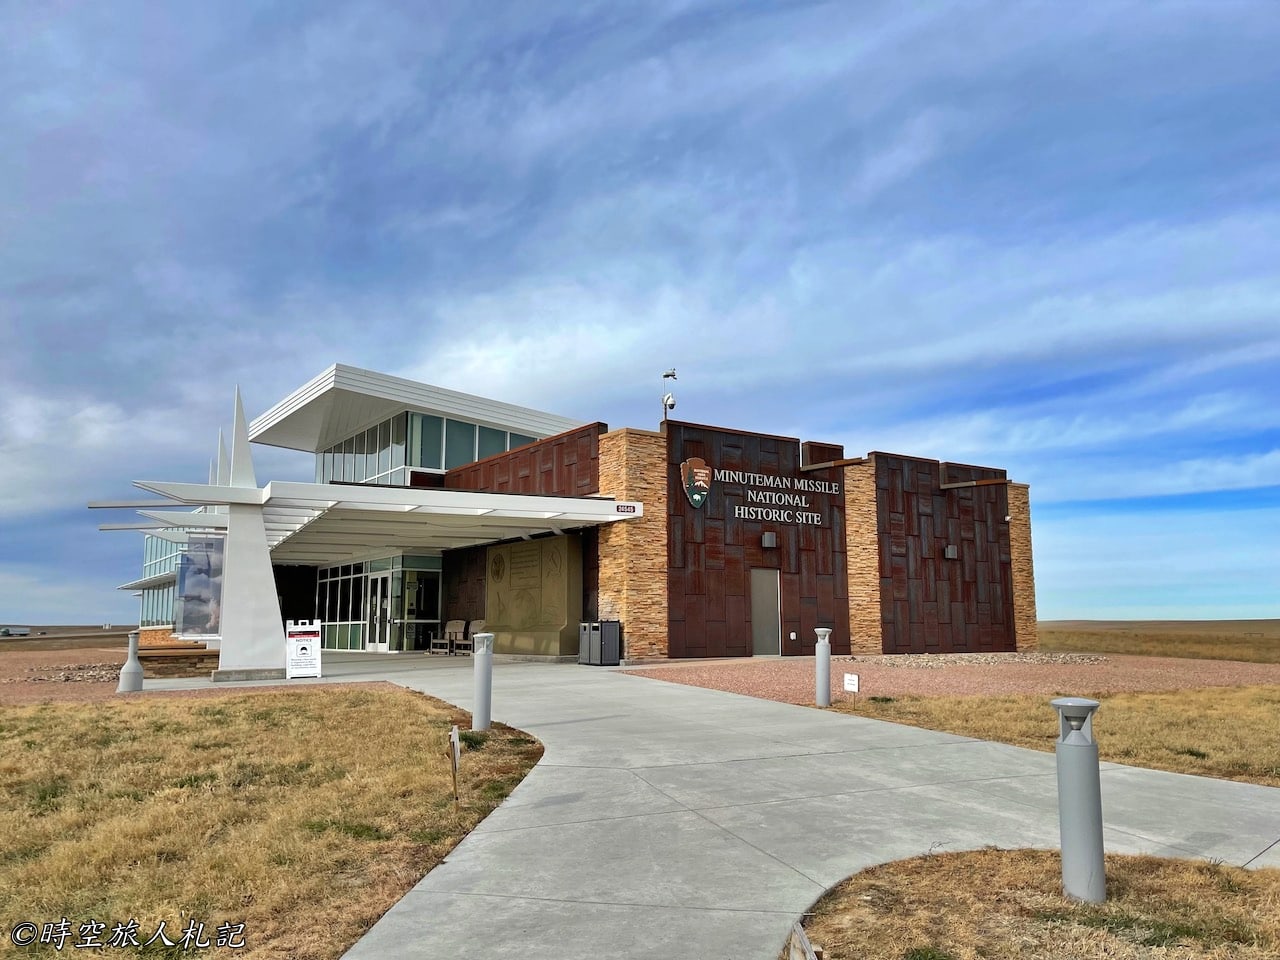 Minuteman Missile national historic site